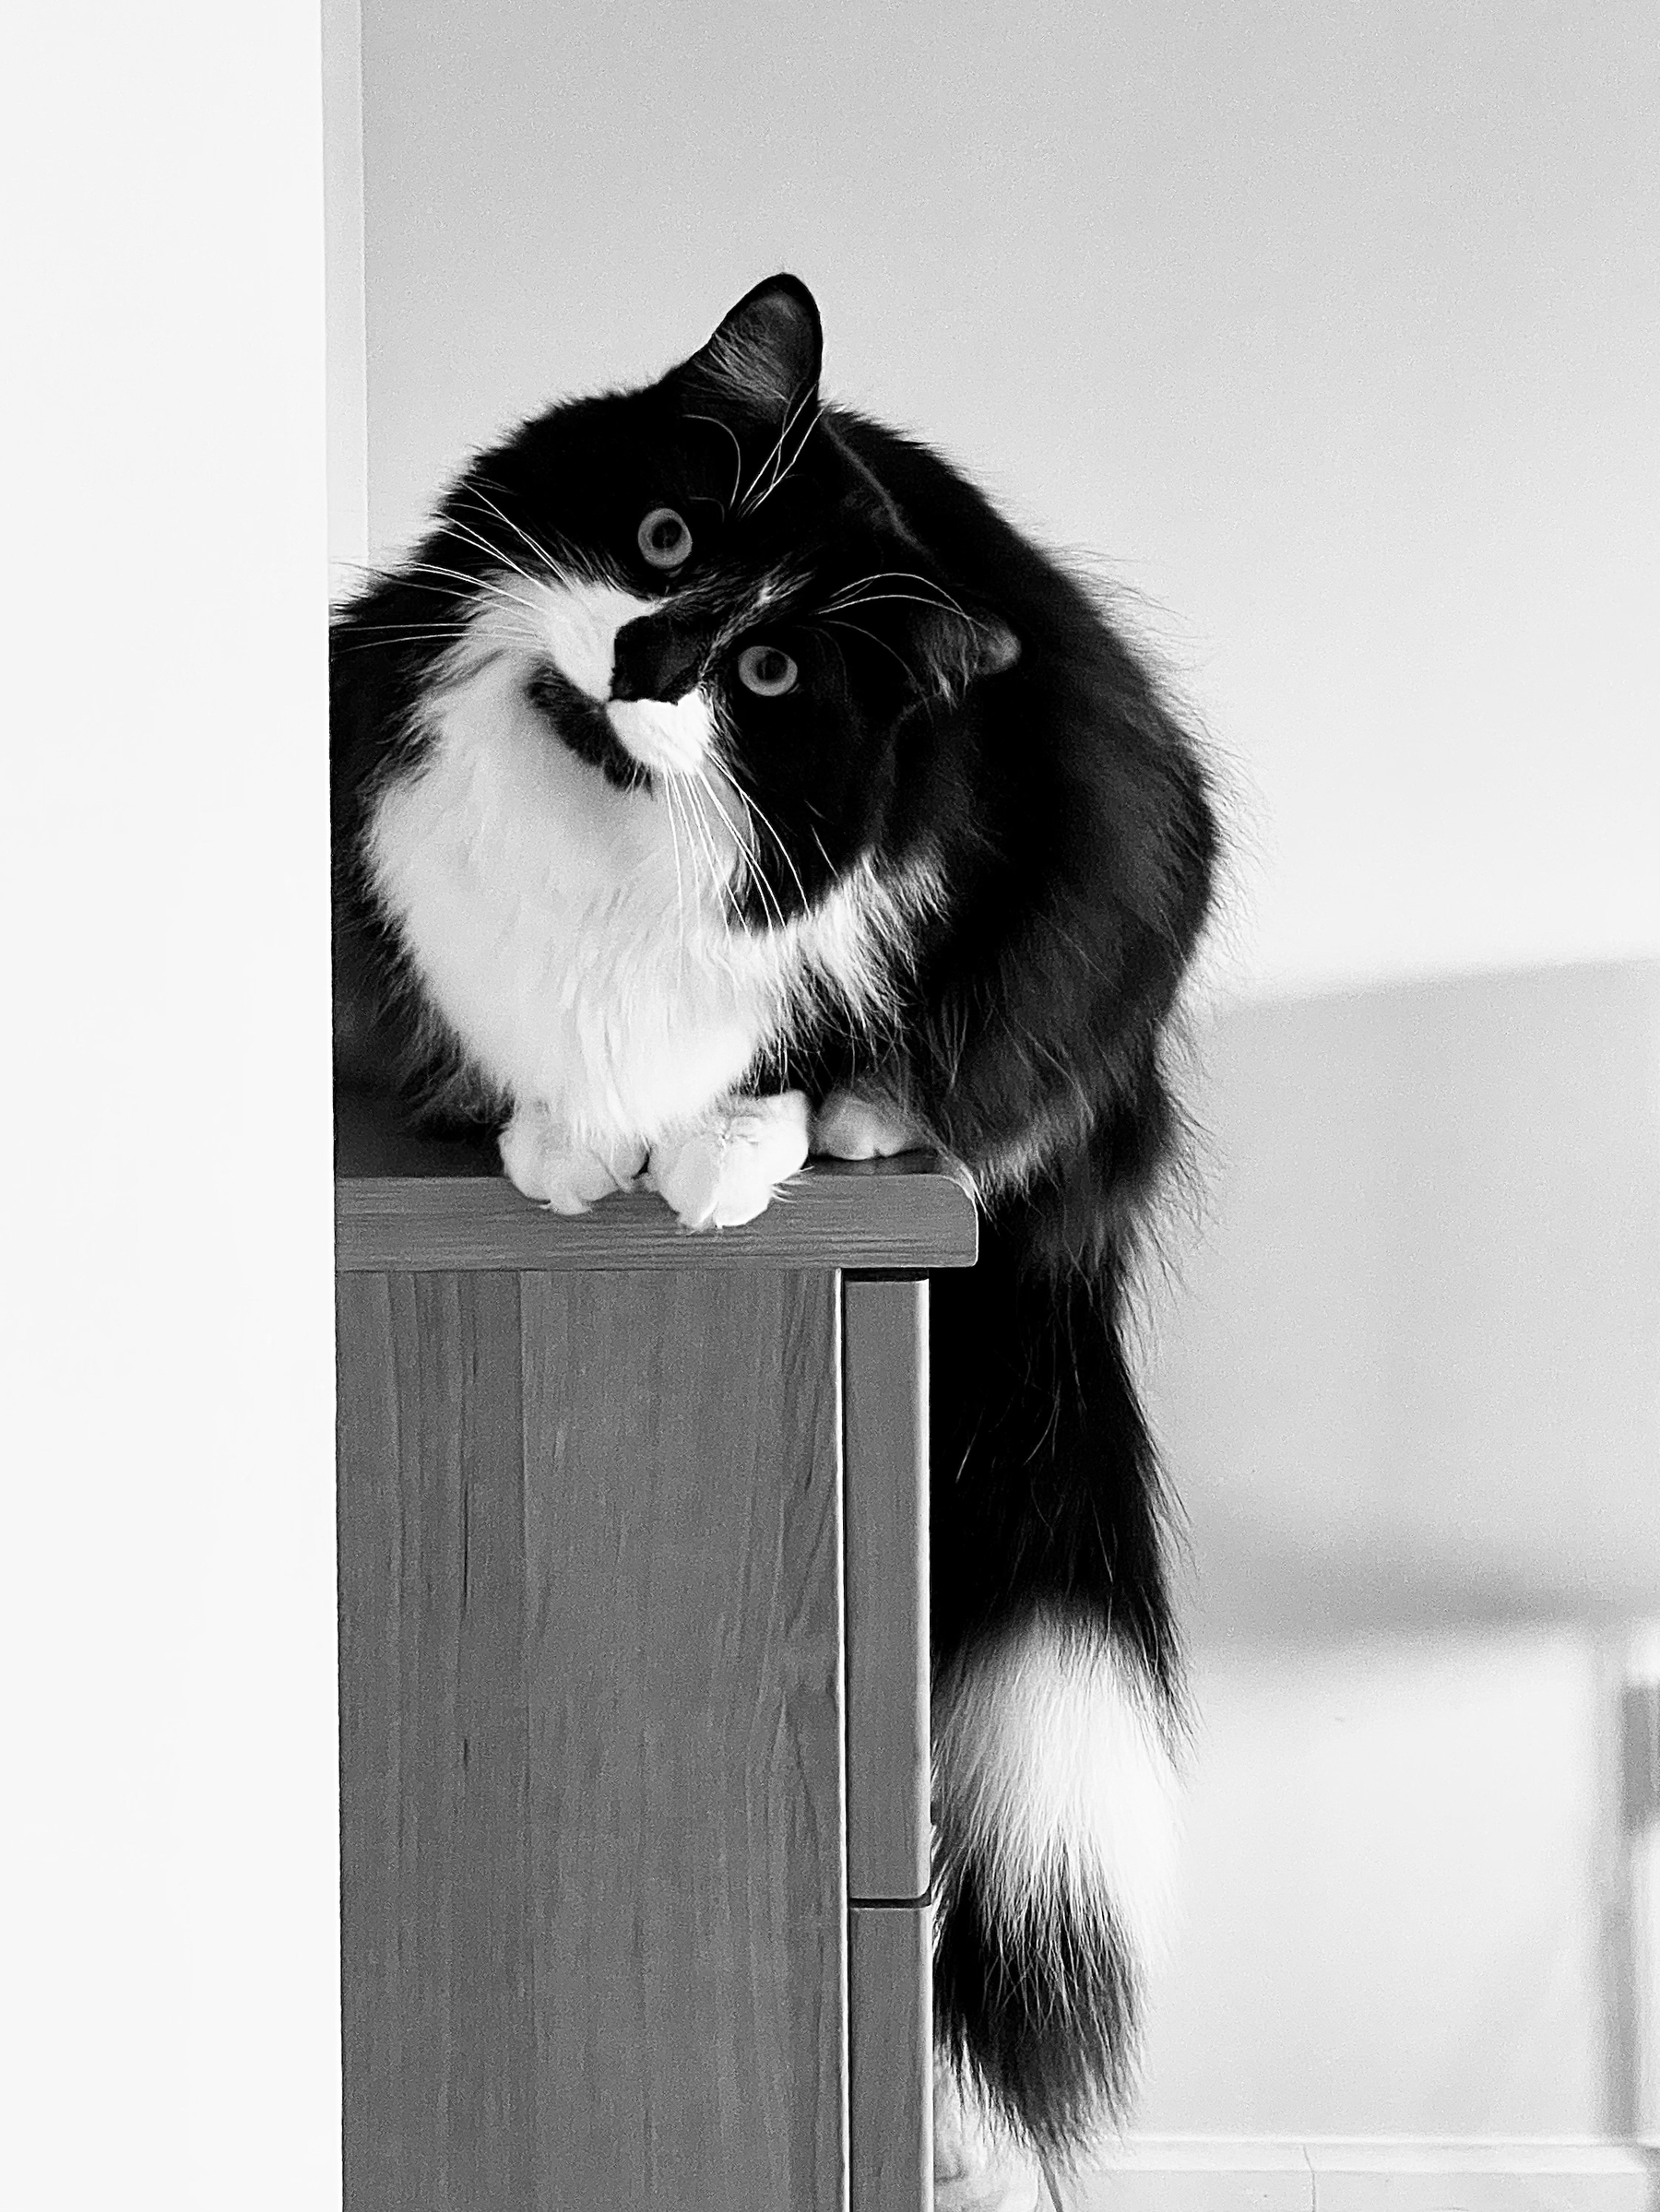 A monochrome photo of a black-and-white long-haired tuxedo cat perched atop a dresser, facing the camera head-on, his head cocked slightly to the right with a quizzical look on his face. His tail is dangling off the side of the dresser.